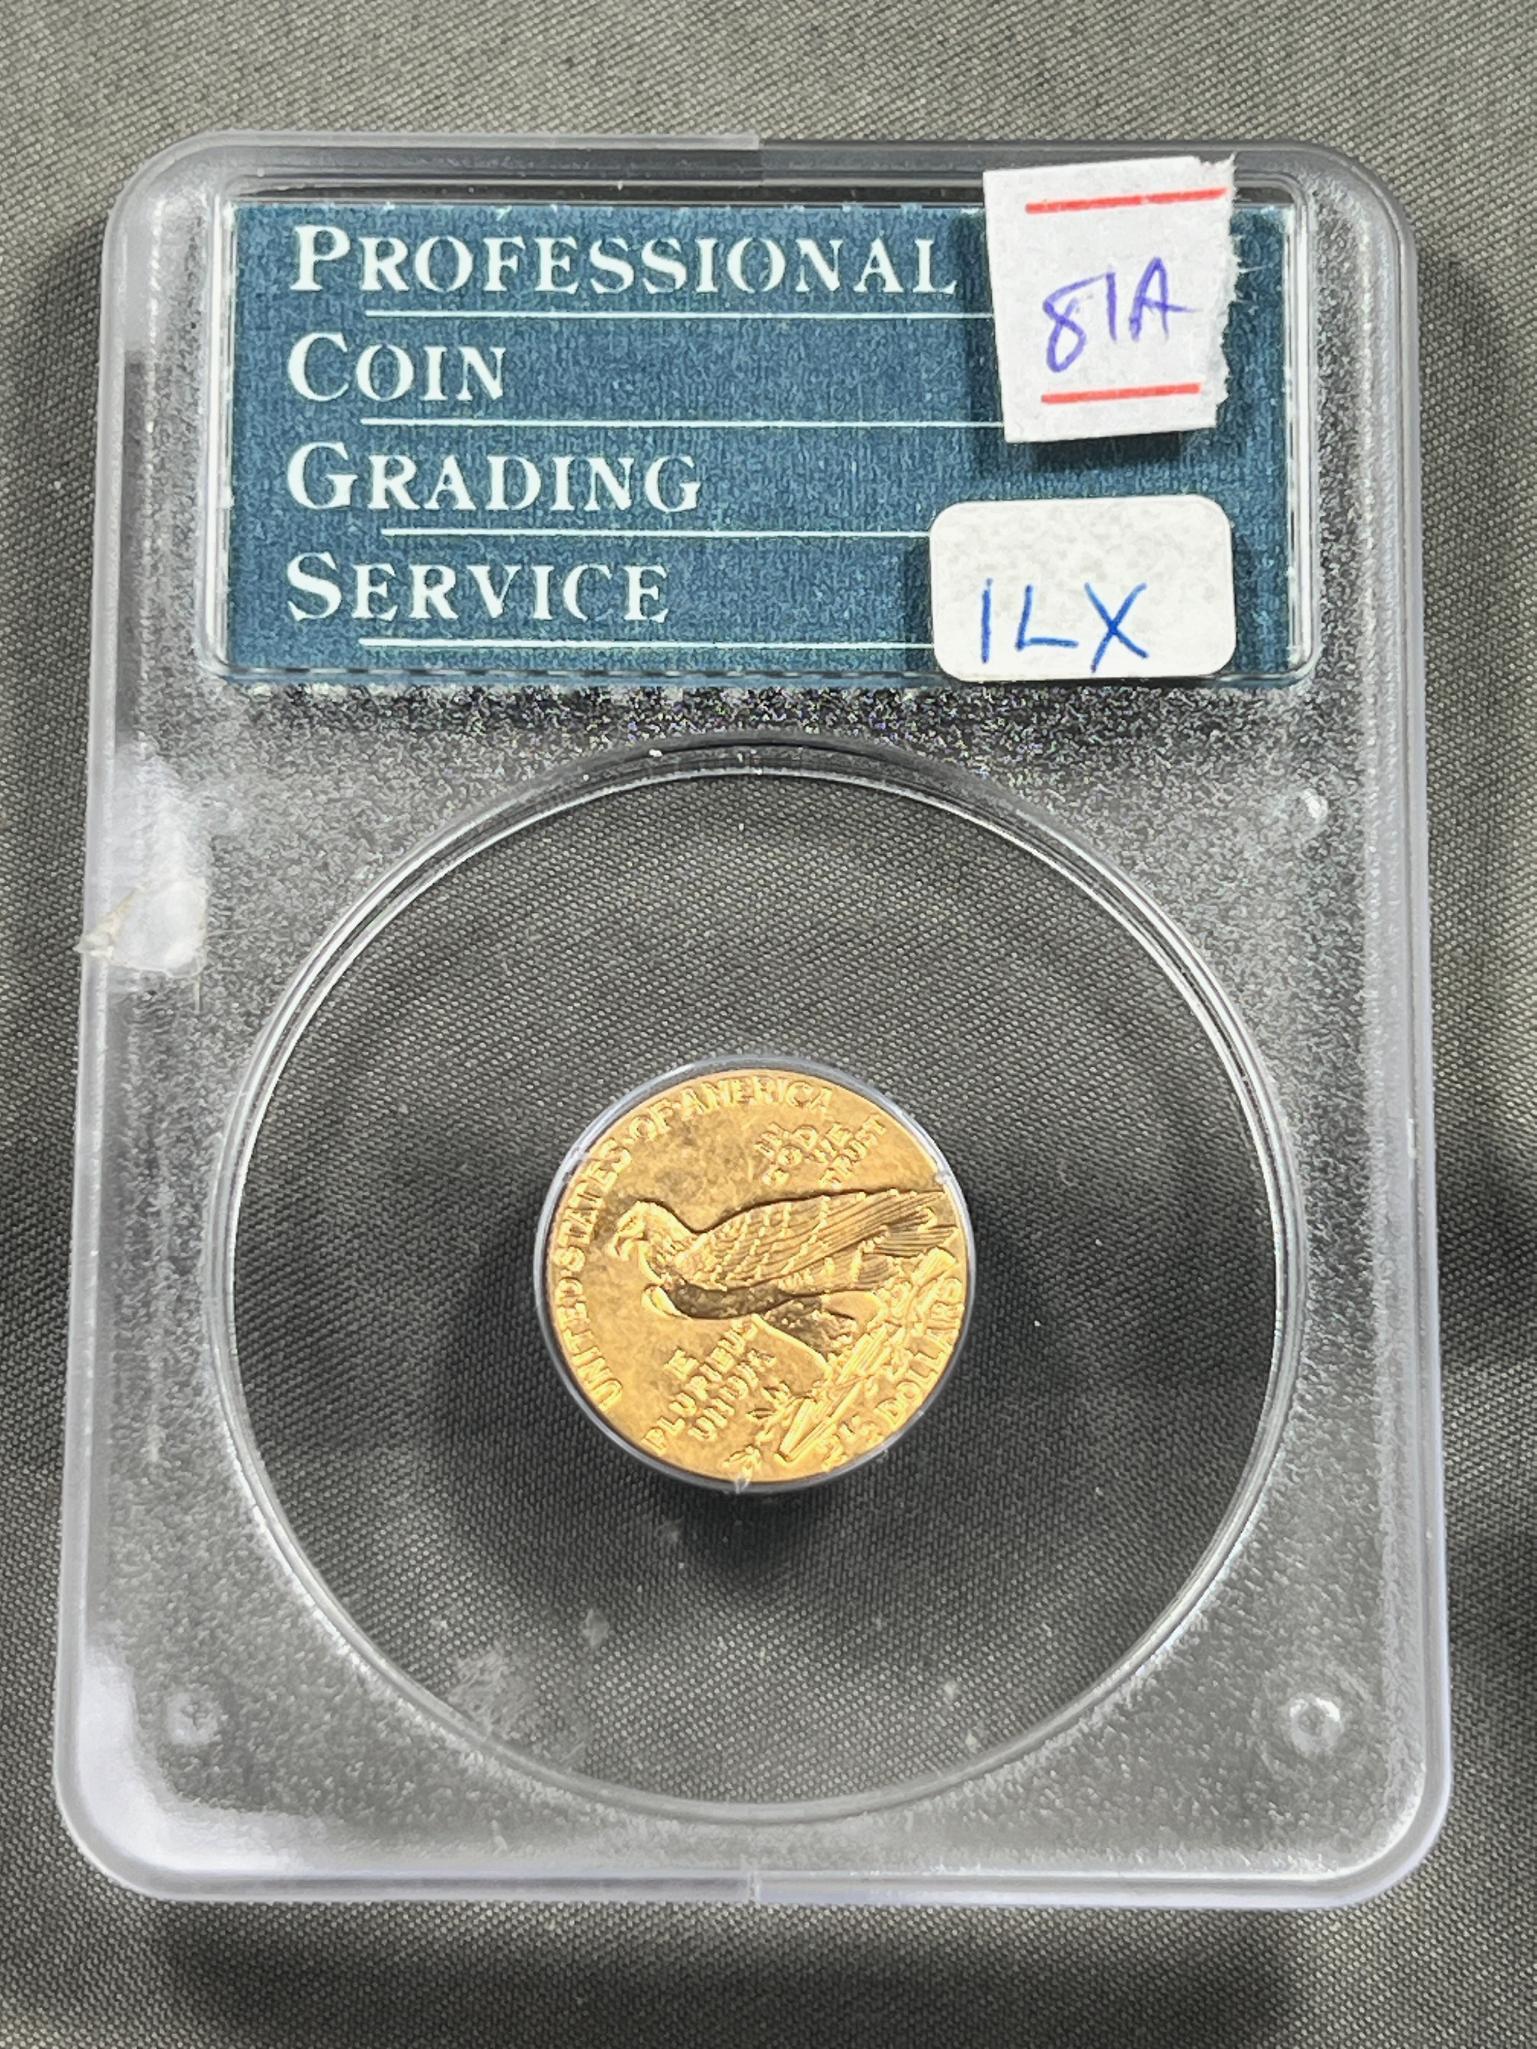 AUCTION SPOTLIGHT! 1929 GOLD $2.5 Gold Indian in AU58 "Rattler" PCGS holder